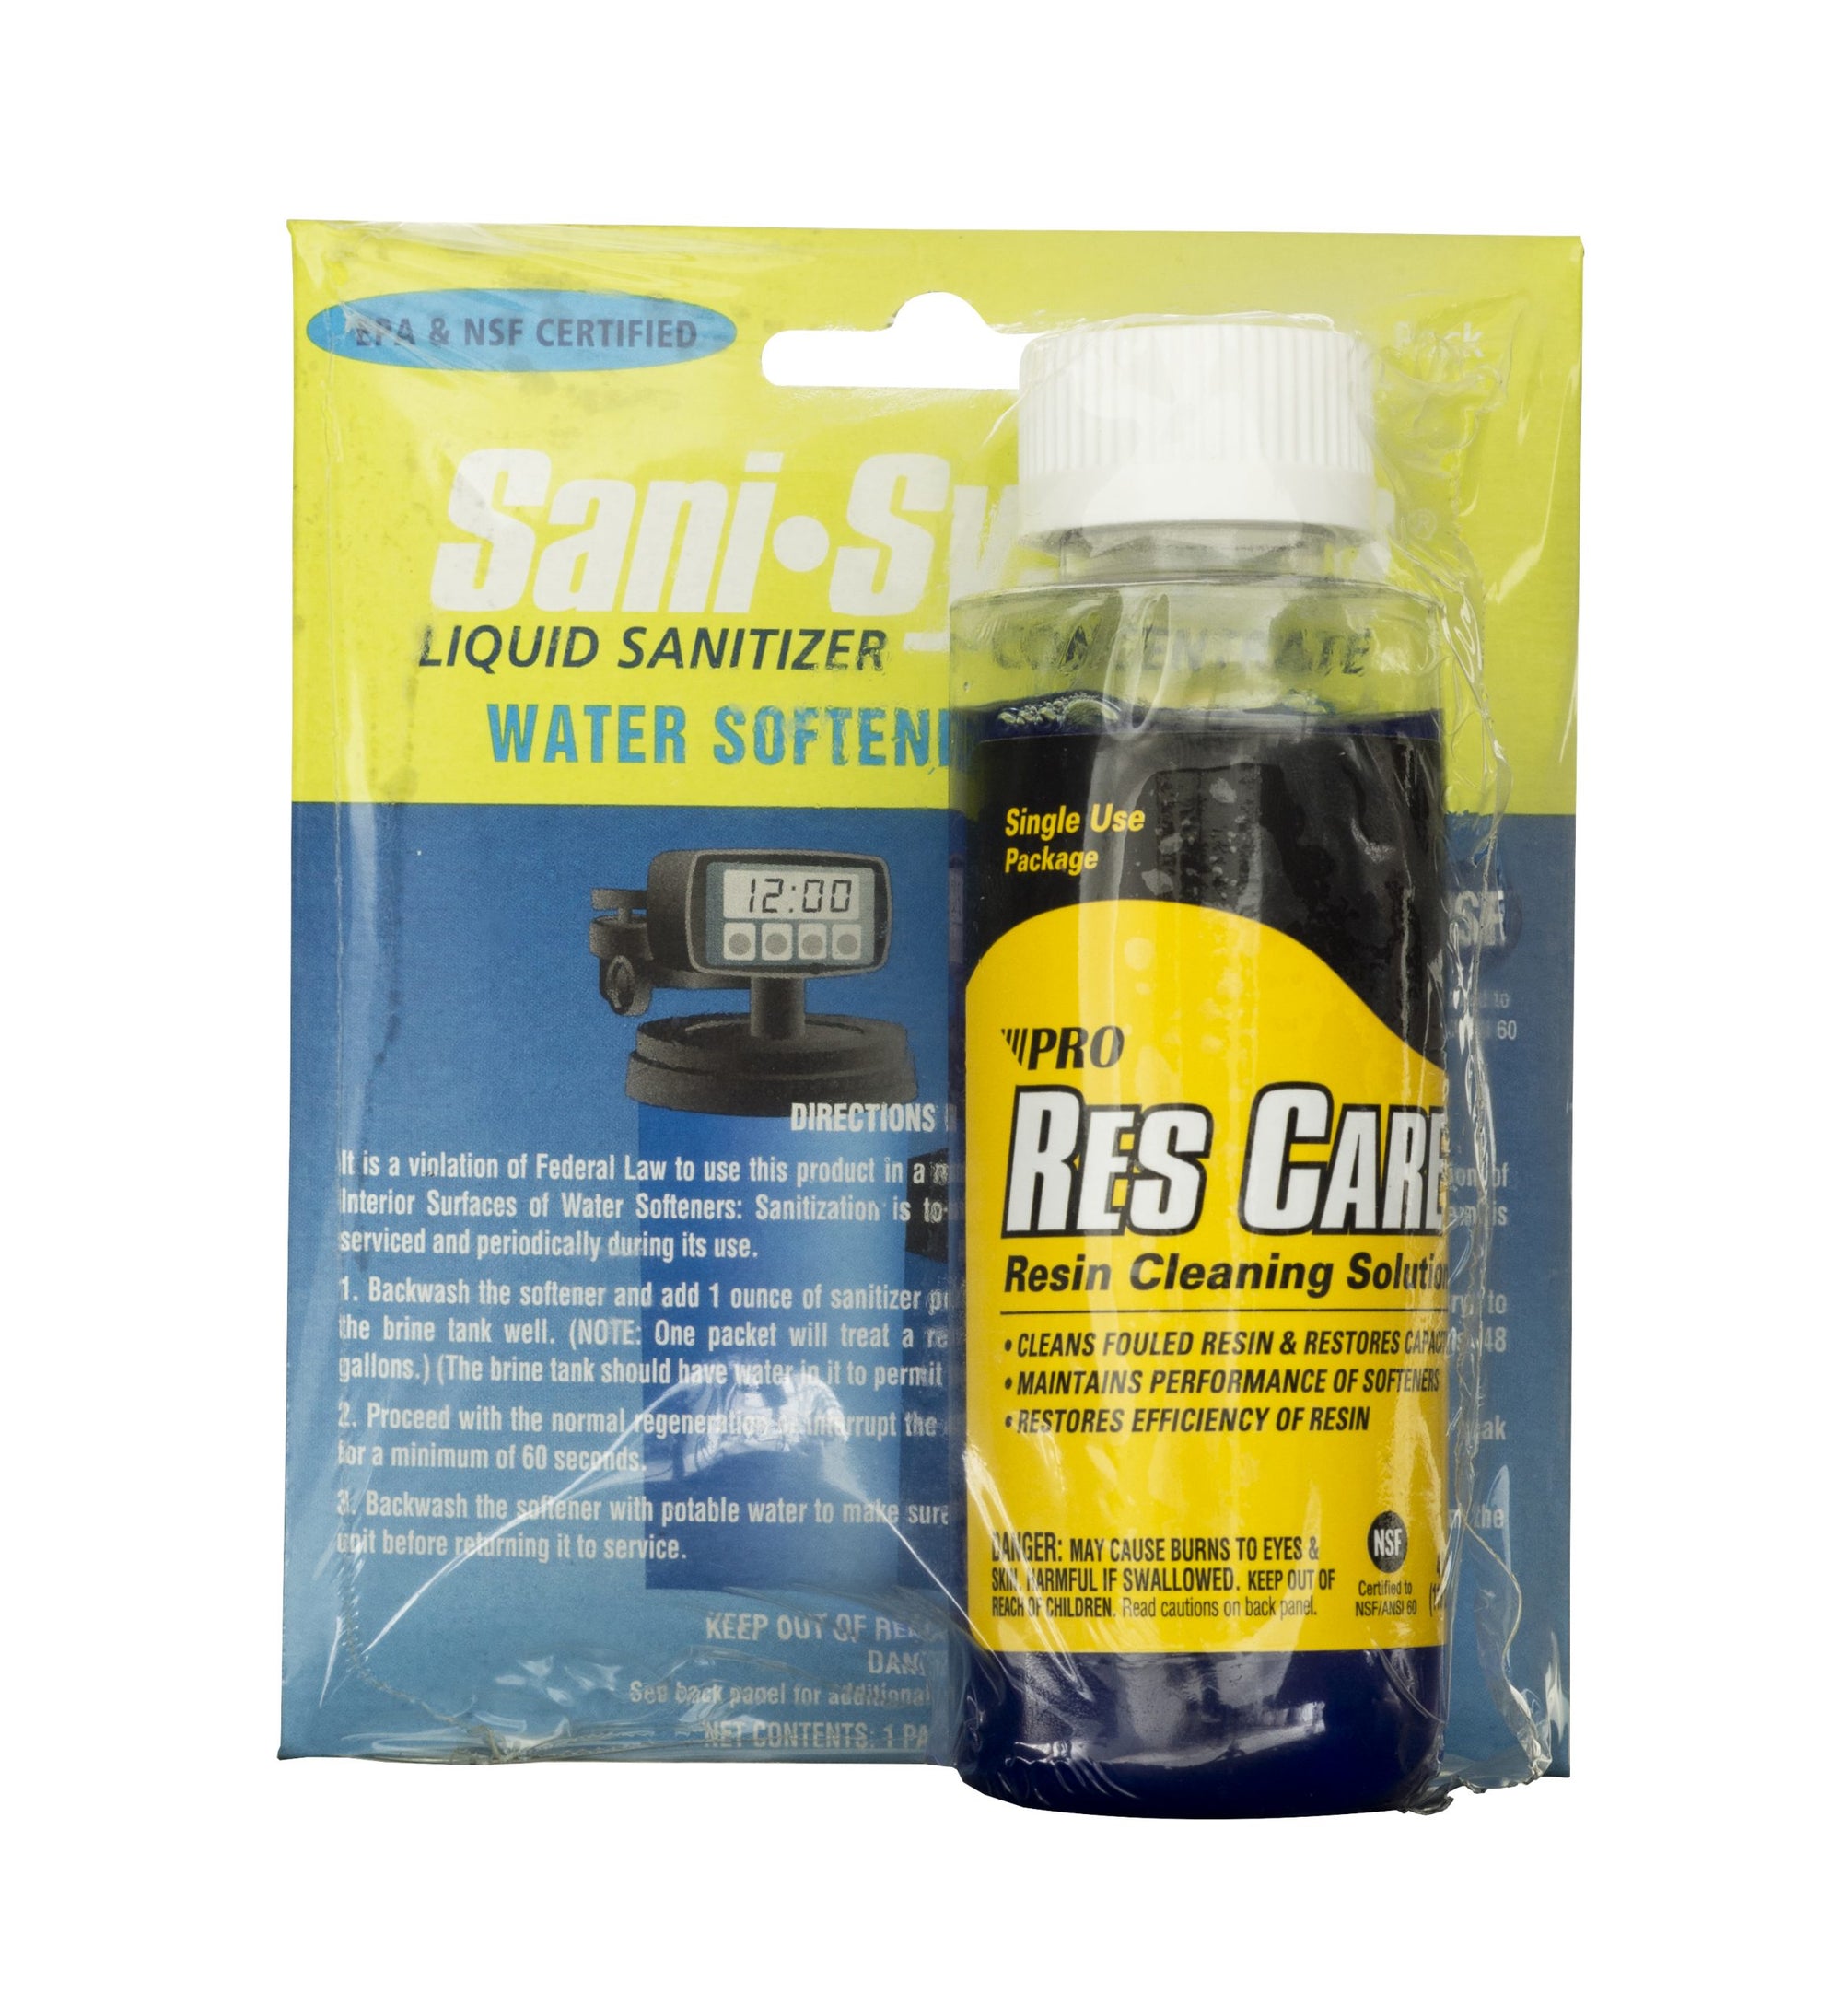 Res-Up Water Softener Cleaner (1 Gallon)